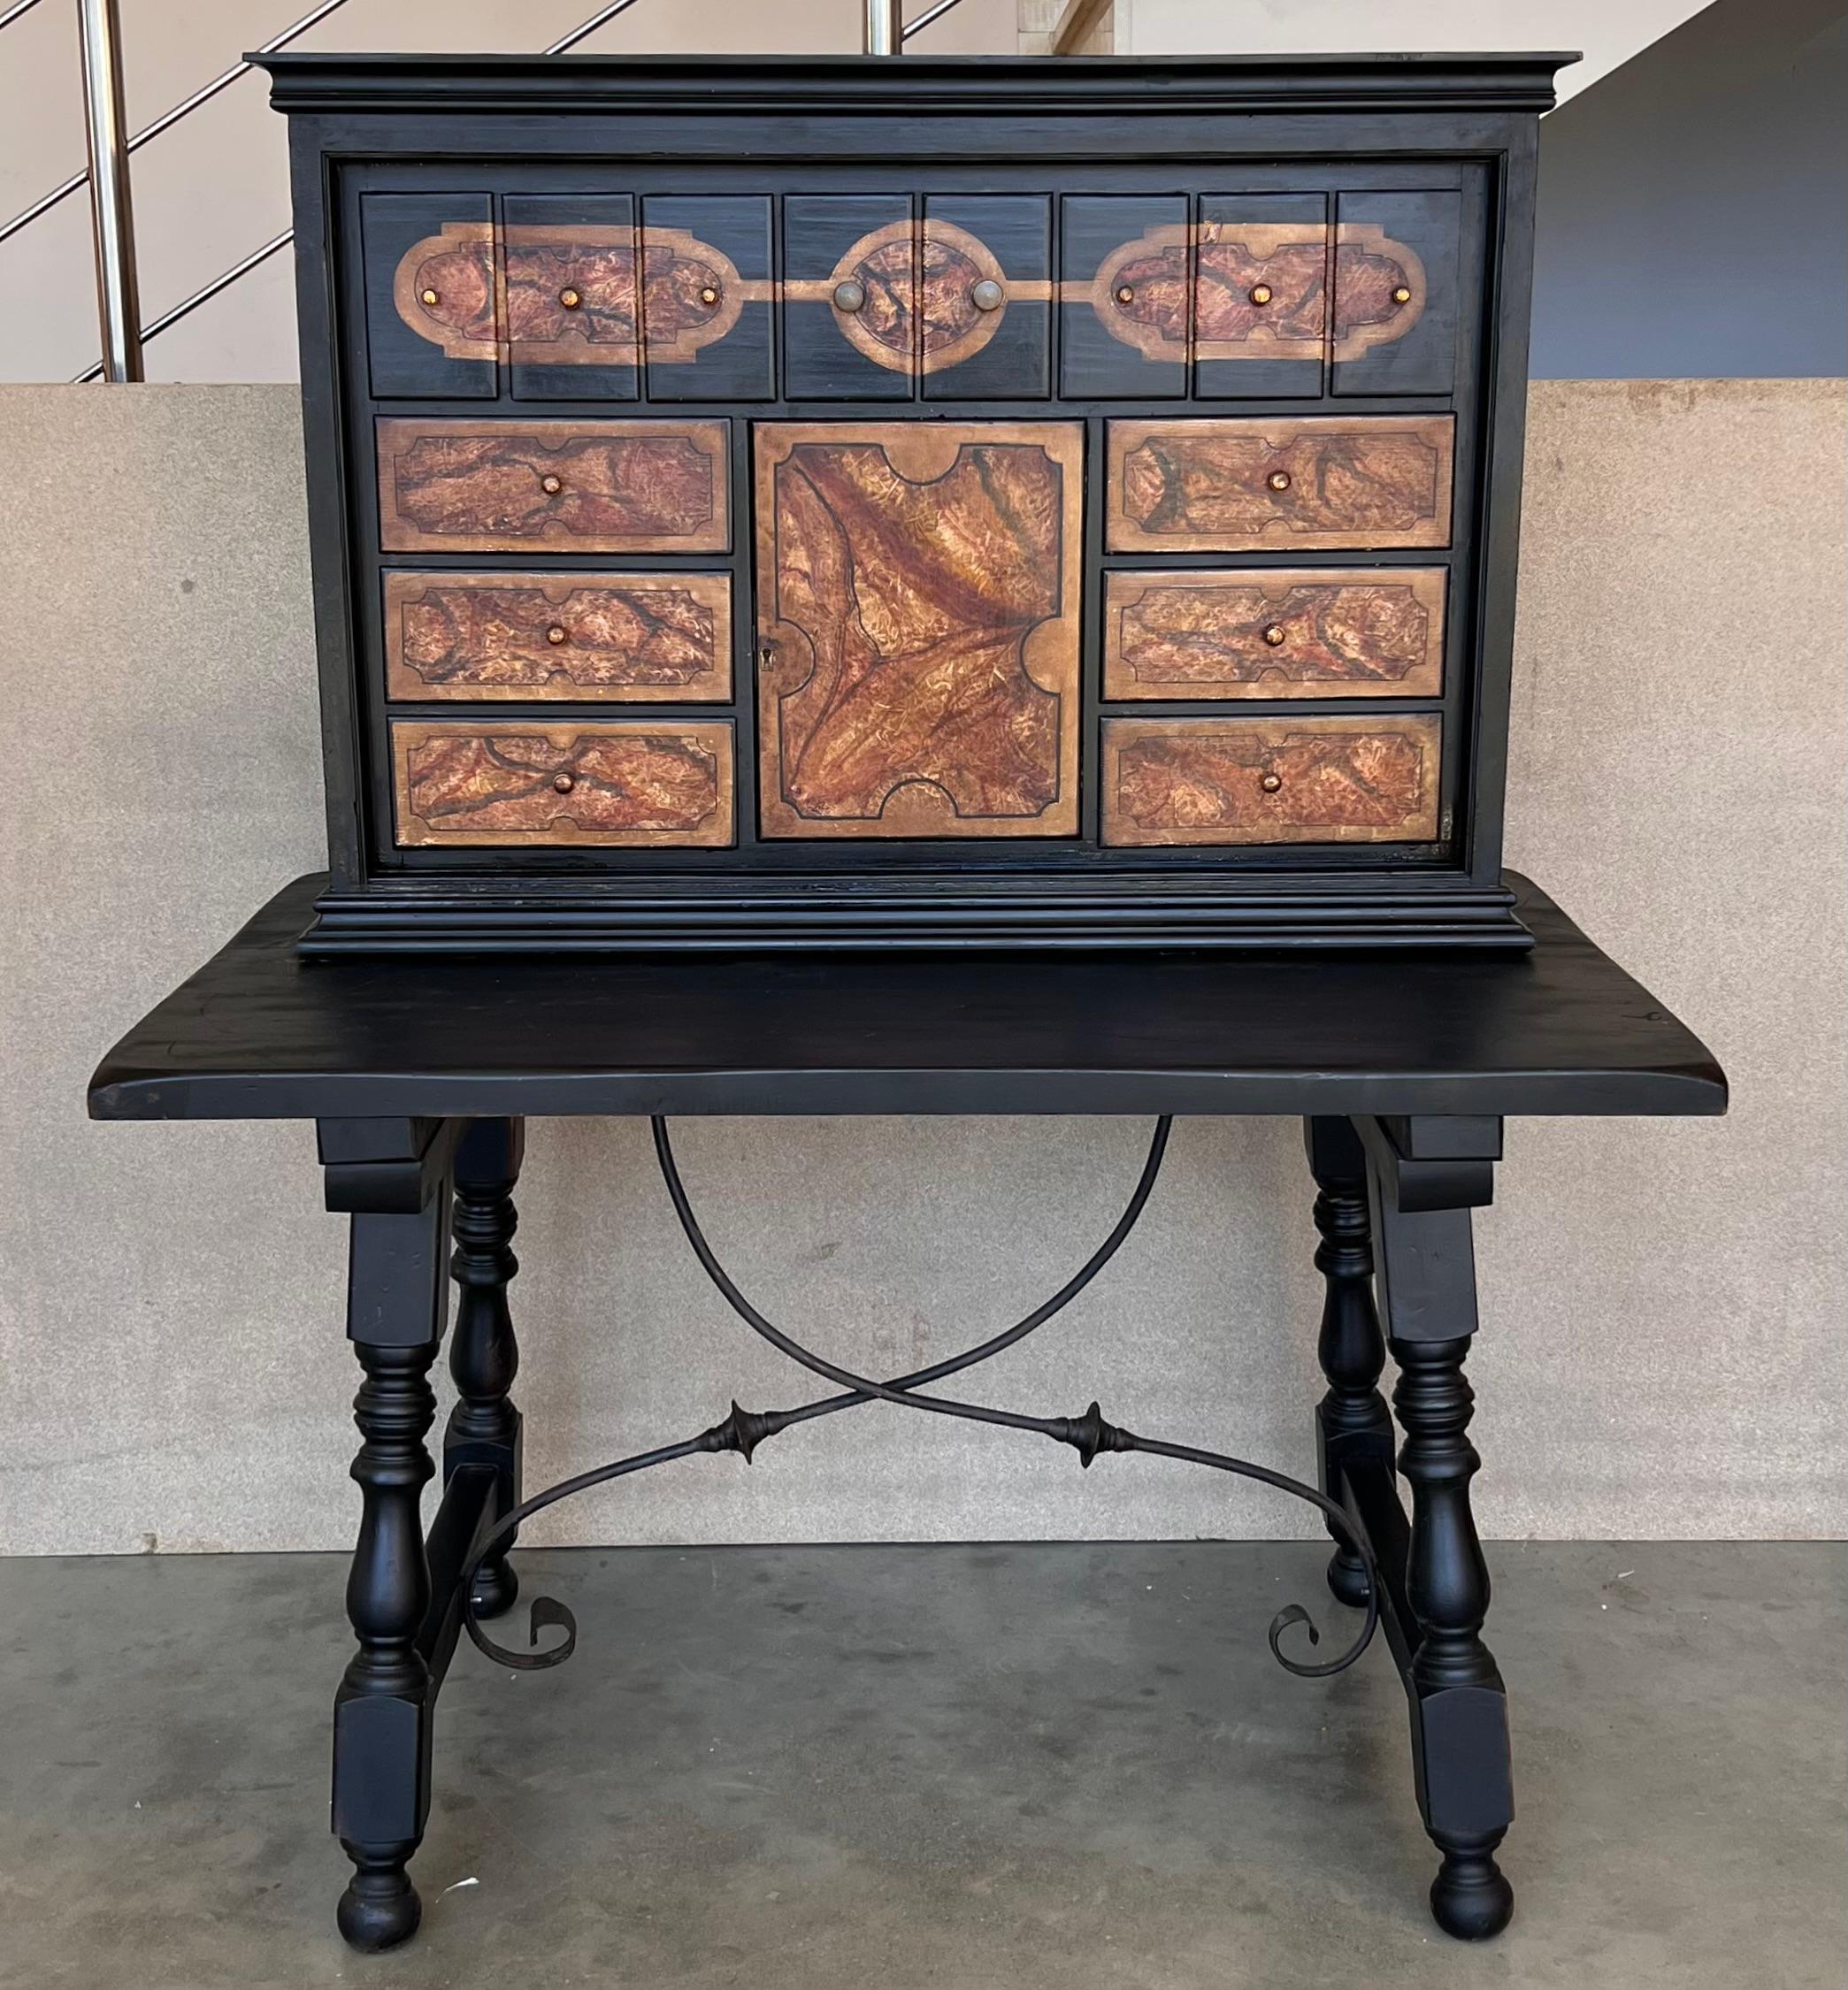 This Bargueno is a portable desk. The base is typically a Spanish table and dates from 19th Century. The upper part was added in the 20th century in England and dates from the Arts and Craft movement. A movement recognizable in its different